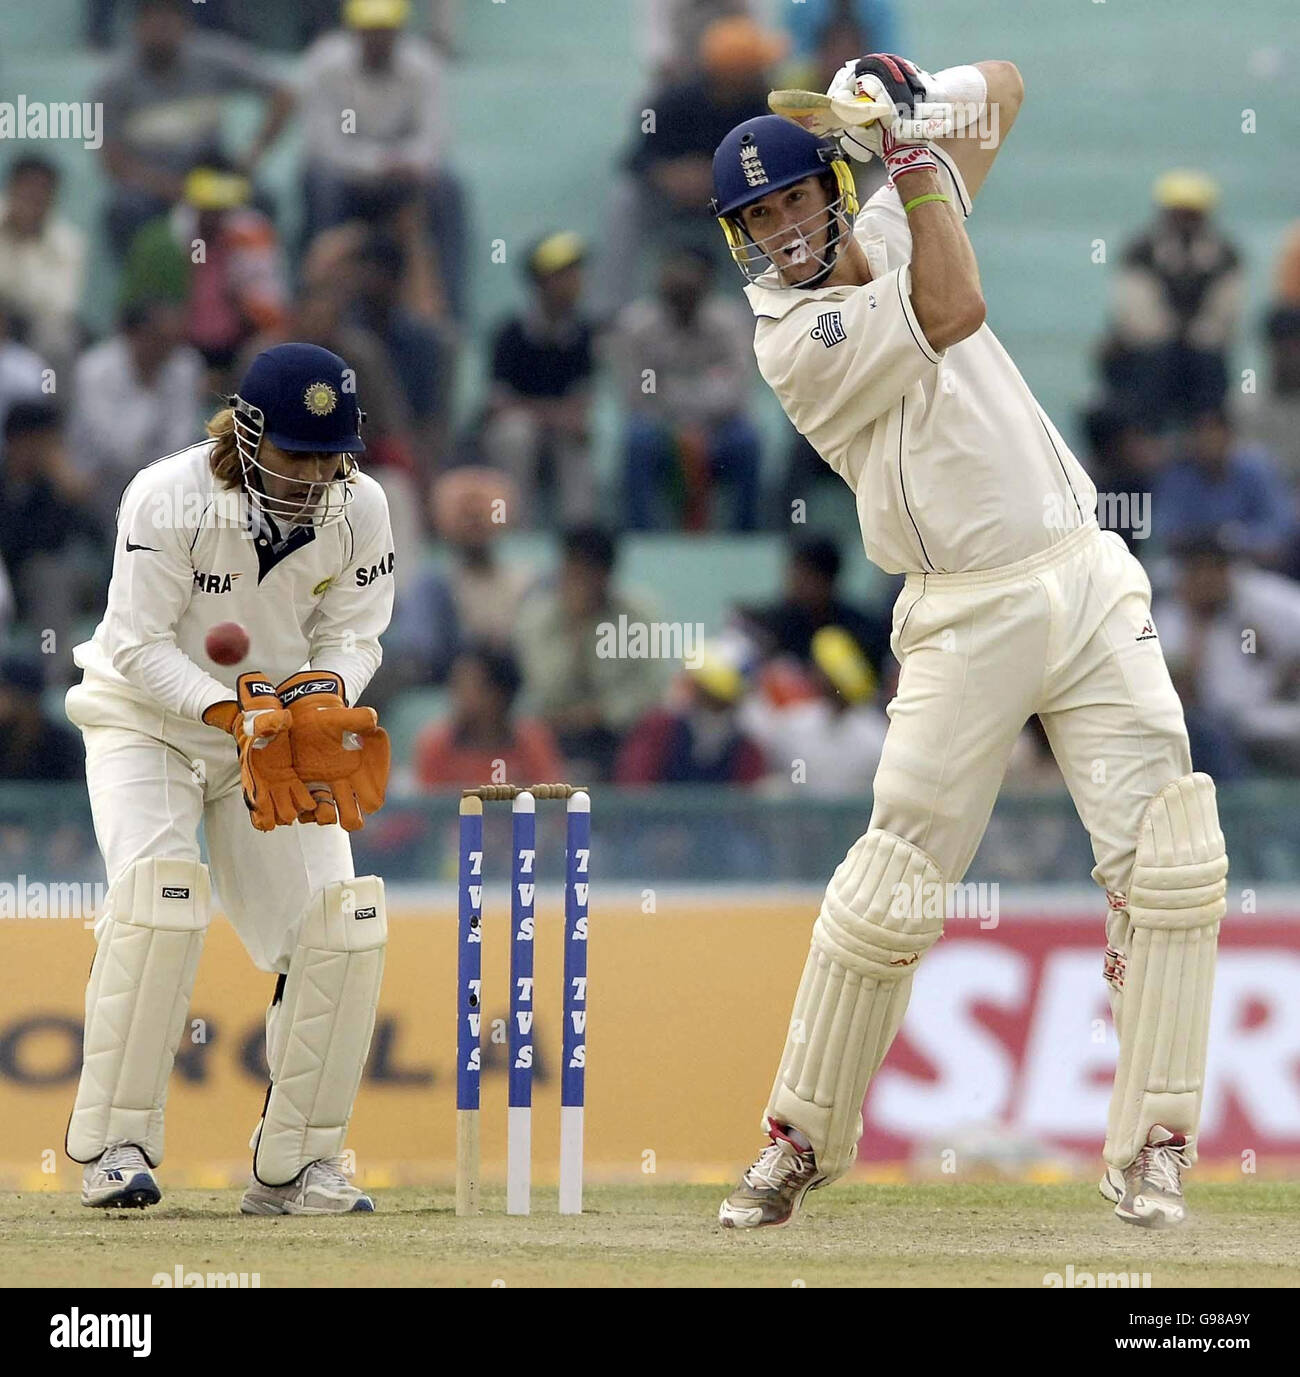 England's Kevin Pietersen (R) in action during the first day of the second Test match against India at the PCA Stadium, Mohali, India, Thursday March 9, 2006. PRESS ASSOCIATION Photo. Photo credit should read: Rebecca Naden/PA. Stock Photo